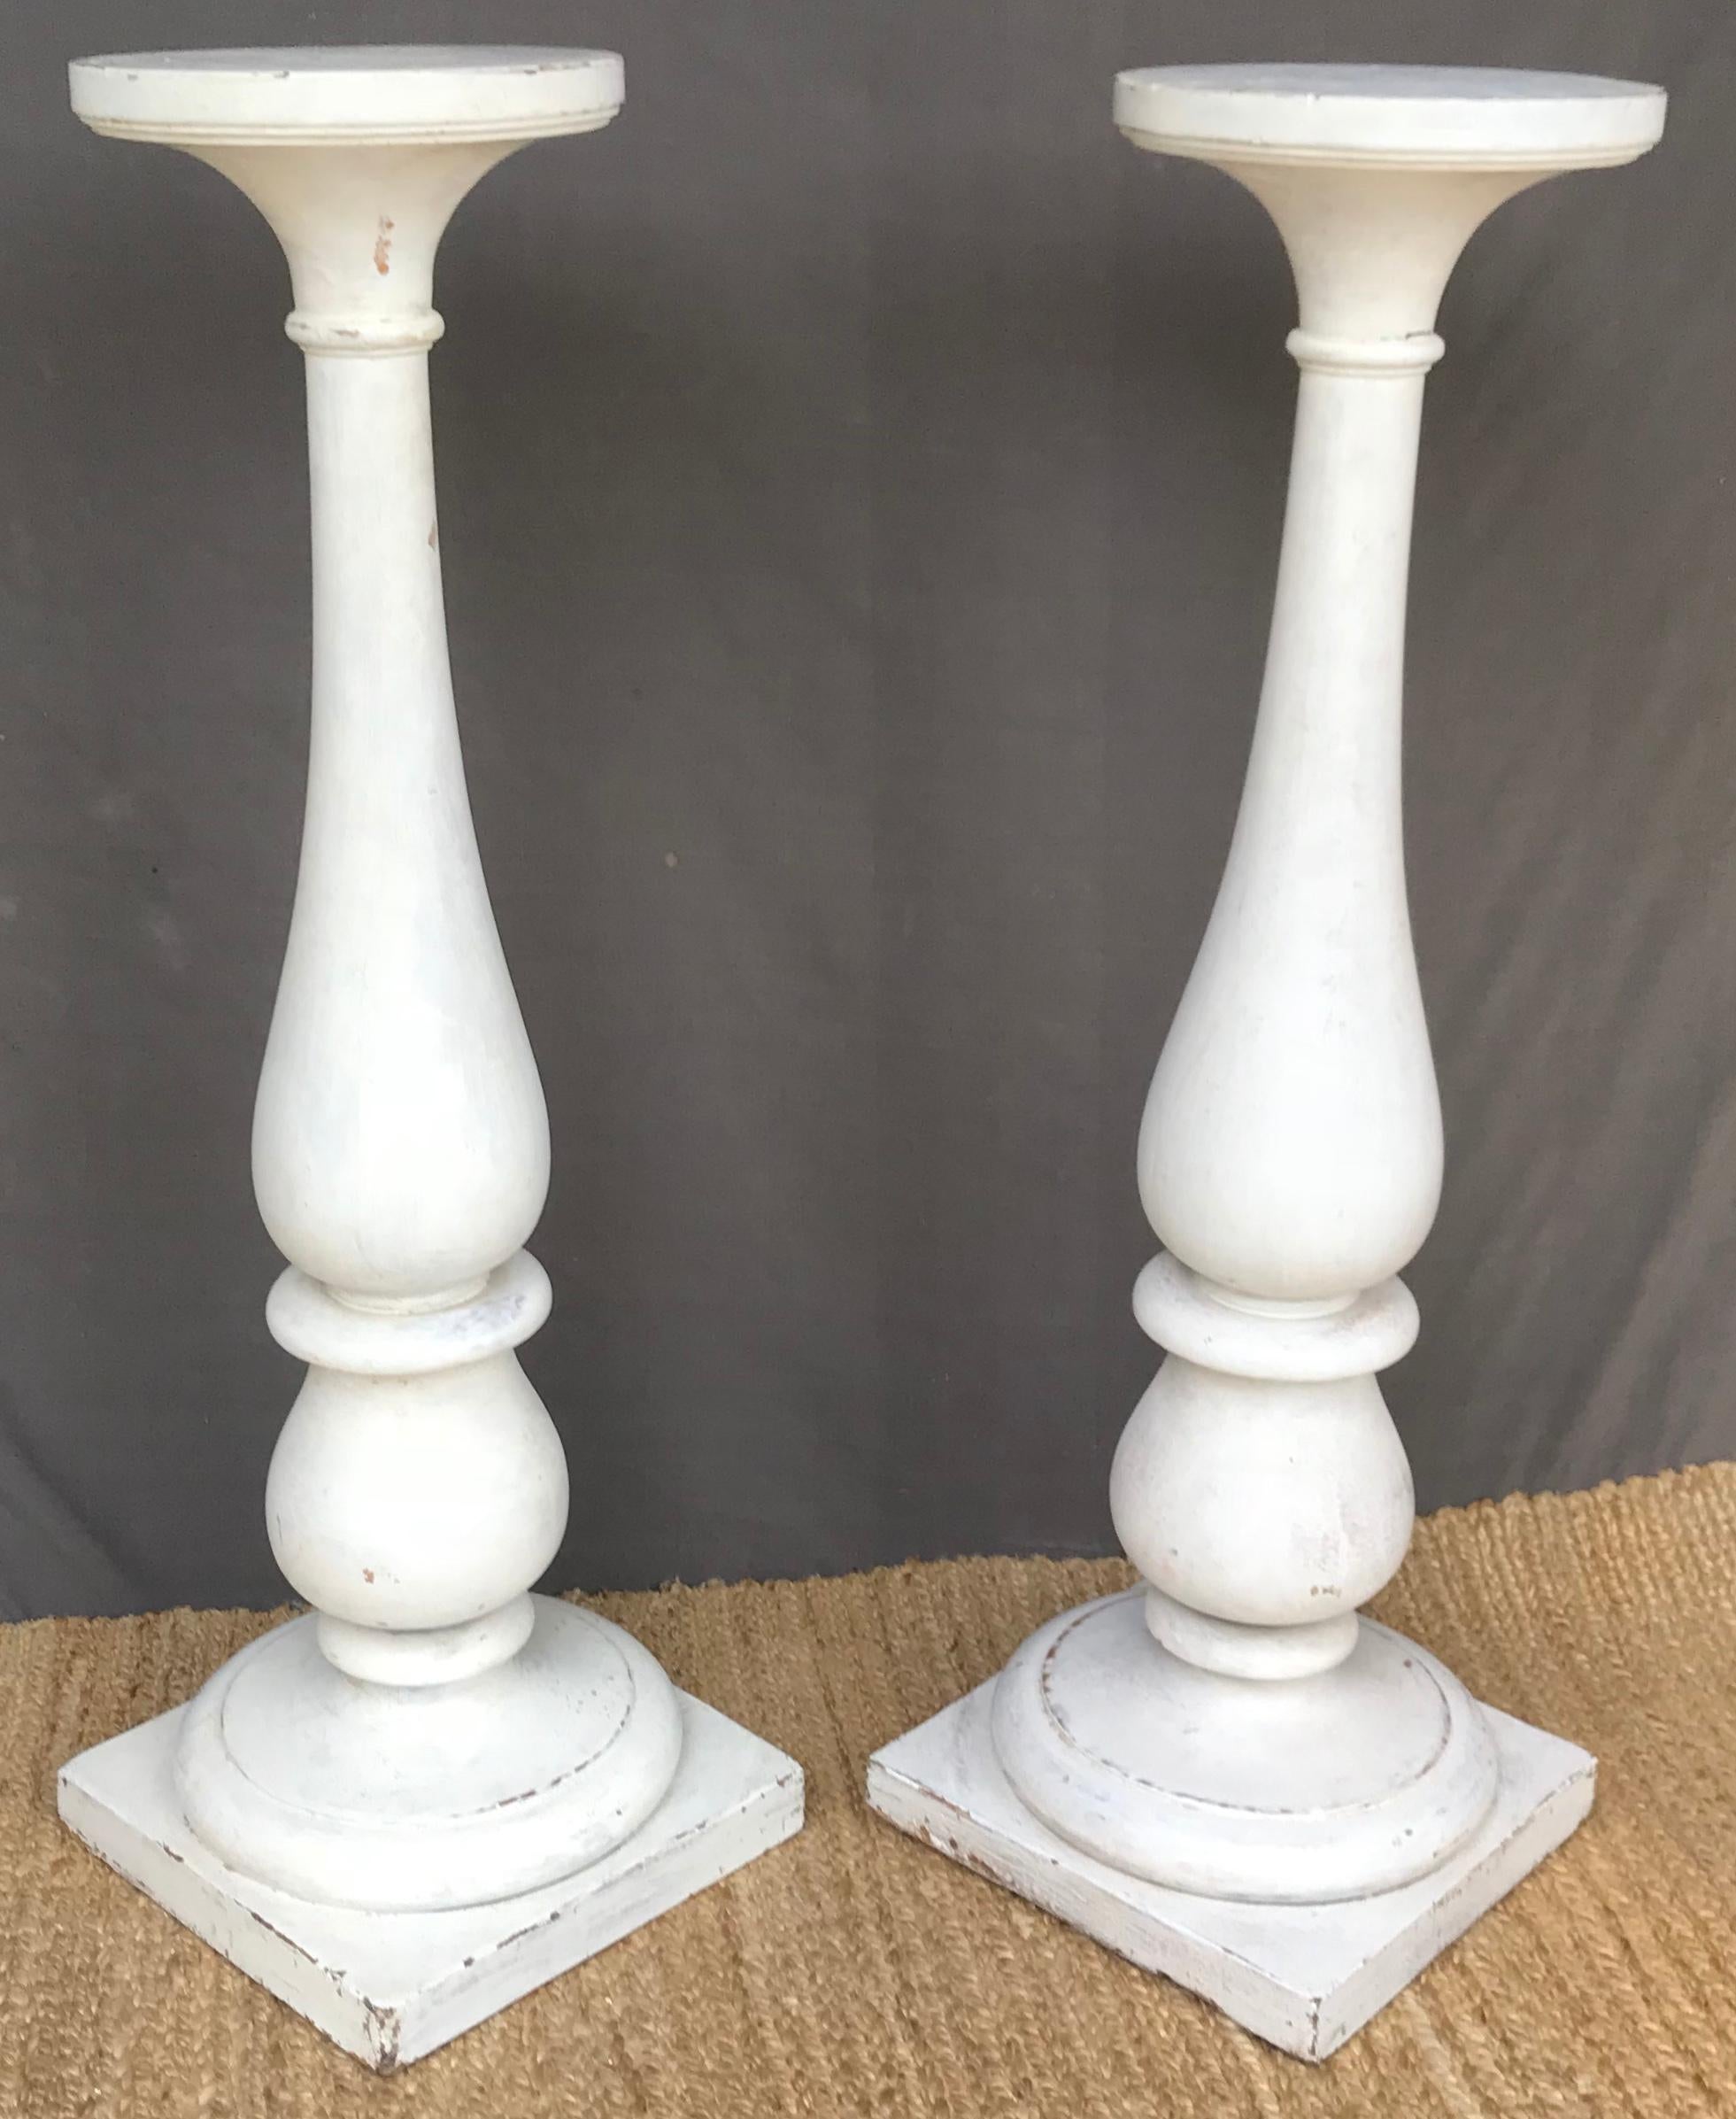 Pair large white Louis XVI pedestals. Pair of large white painted carved baluster shaped pedestals/torchieres in original white gessoed condition, Italy, circa 1790.
Dimensions: 12